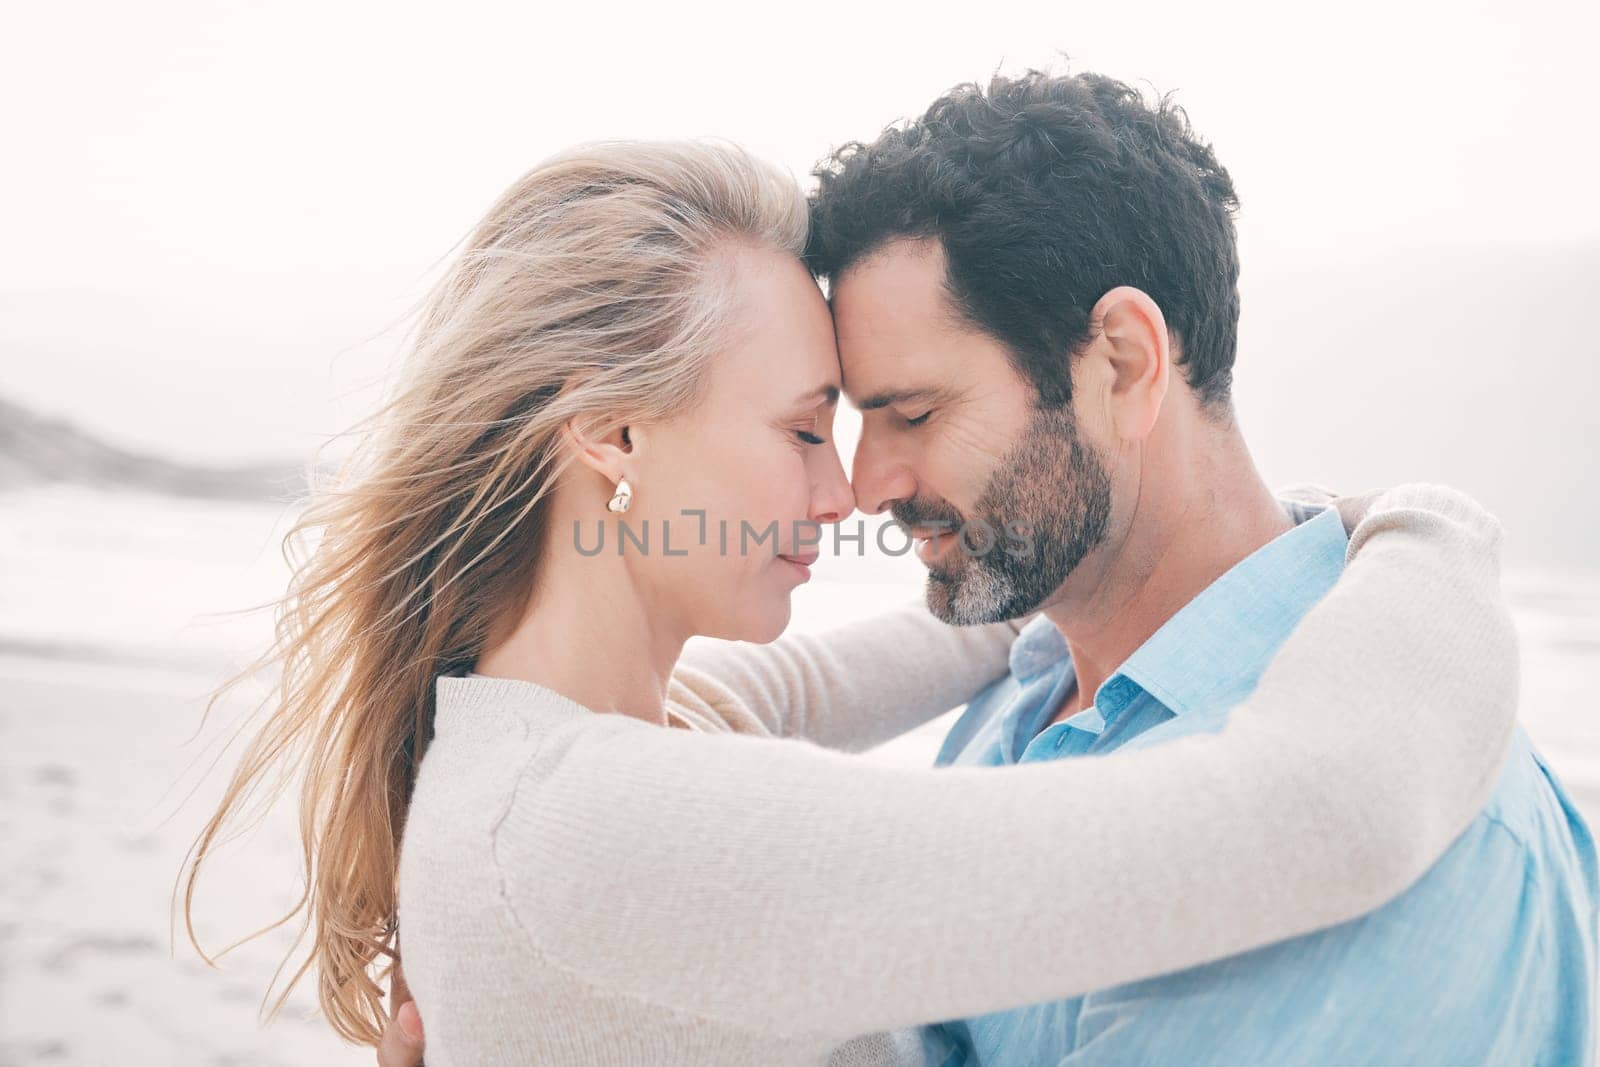 Love, touching face and couple at beach for holiday, vacation and weekend for anniversary. Intimacy, marriage and loving mature man hugging woman for bonding, quality time and romantic trip by ocean.